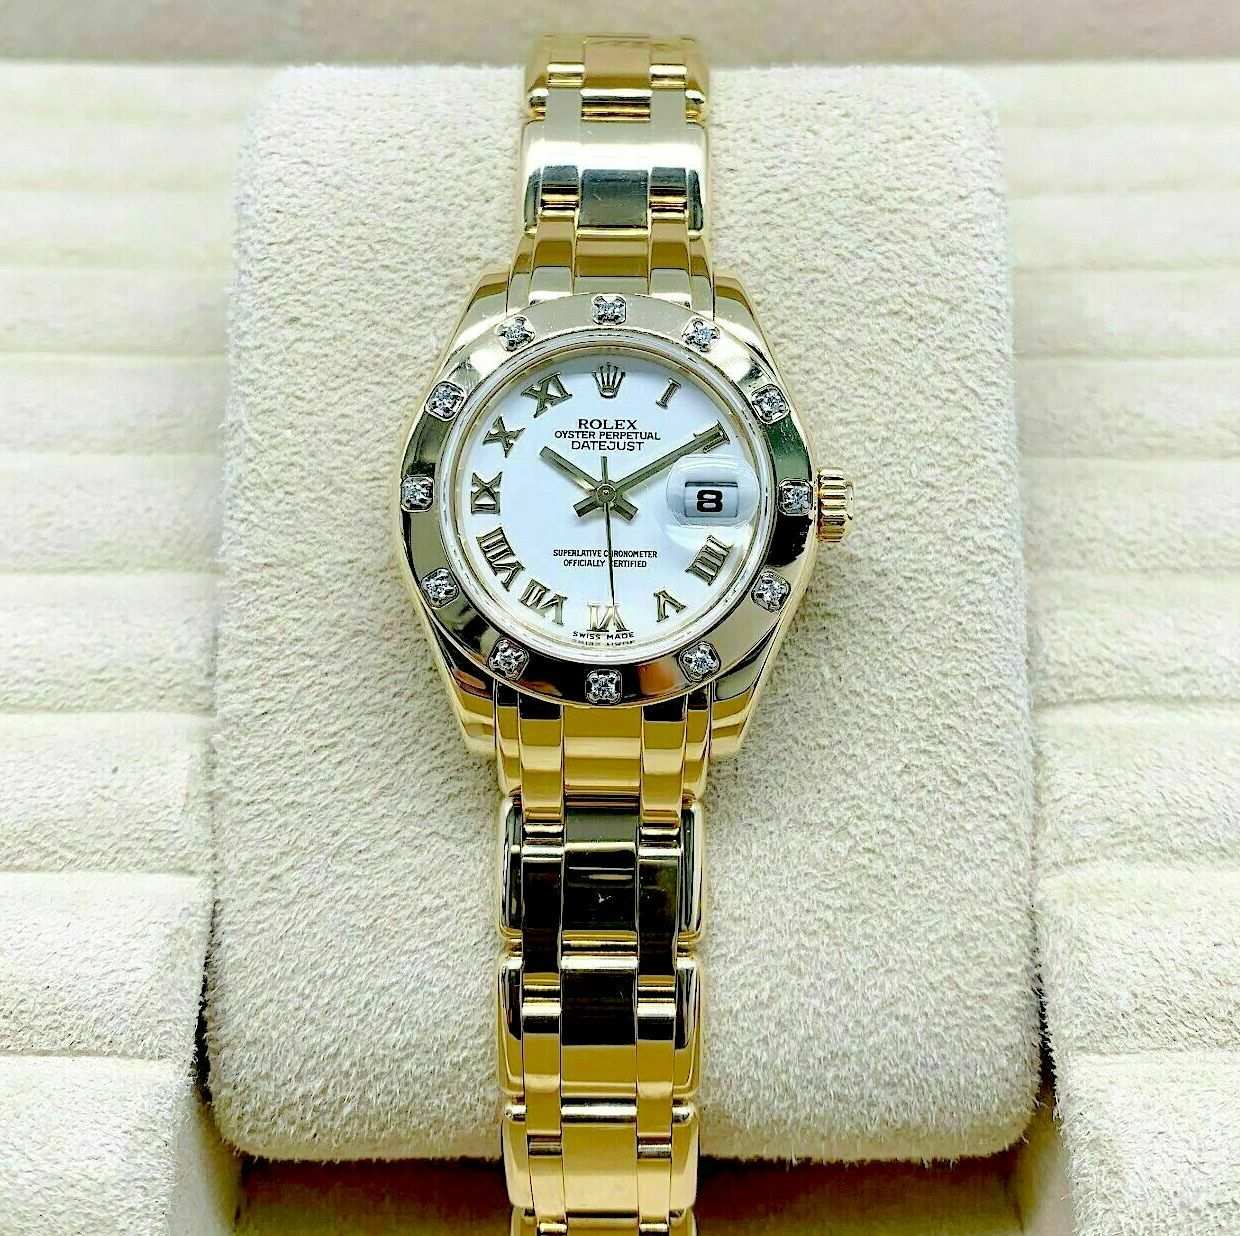 Rolex Datejust Pearlmaster 18K Yellow Gold Watch